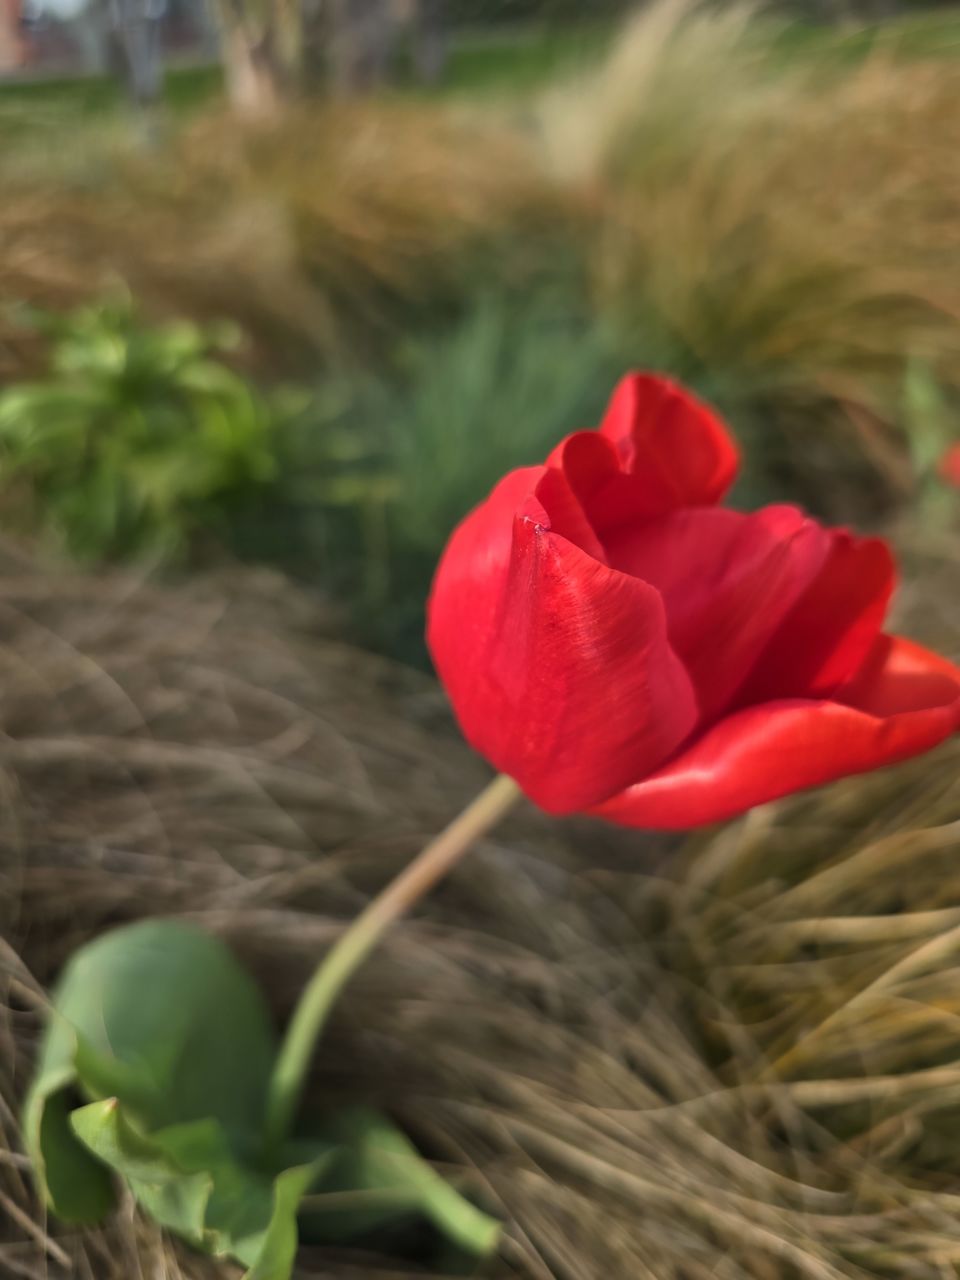 plant, flower, flowering plant, beauty in nature, freshness, red, close-up, nature, petal, fragility, flower head, inflorescence, rose, growth, no people, selective focus, outdoors, day, plant part, leaf, plant stem, focus on foreground, poppy, macro photography